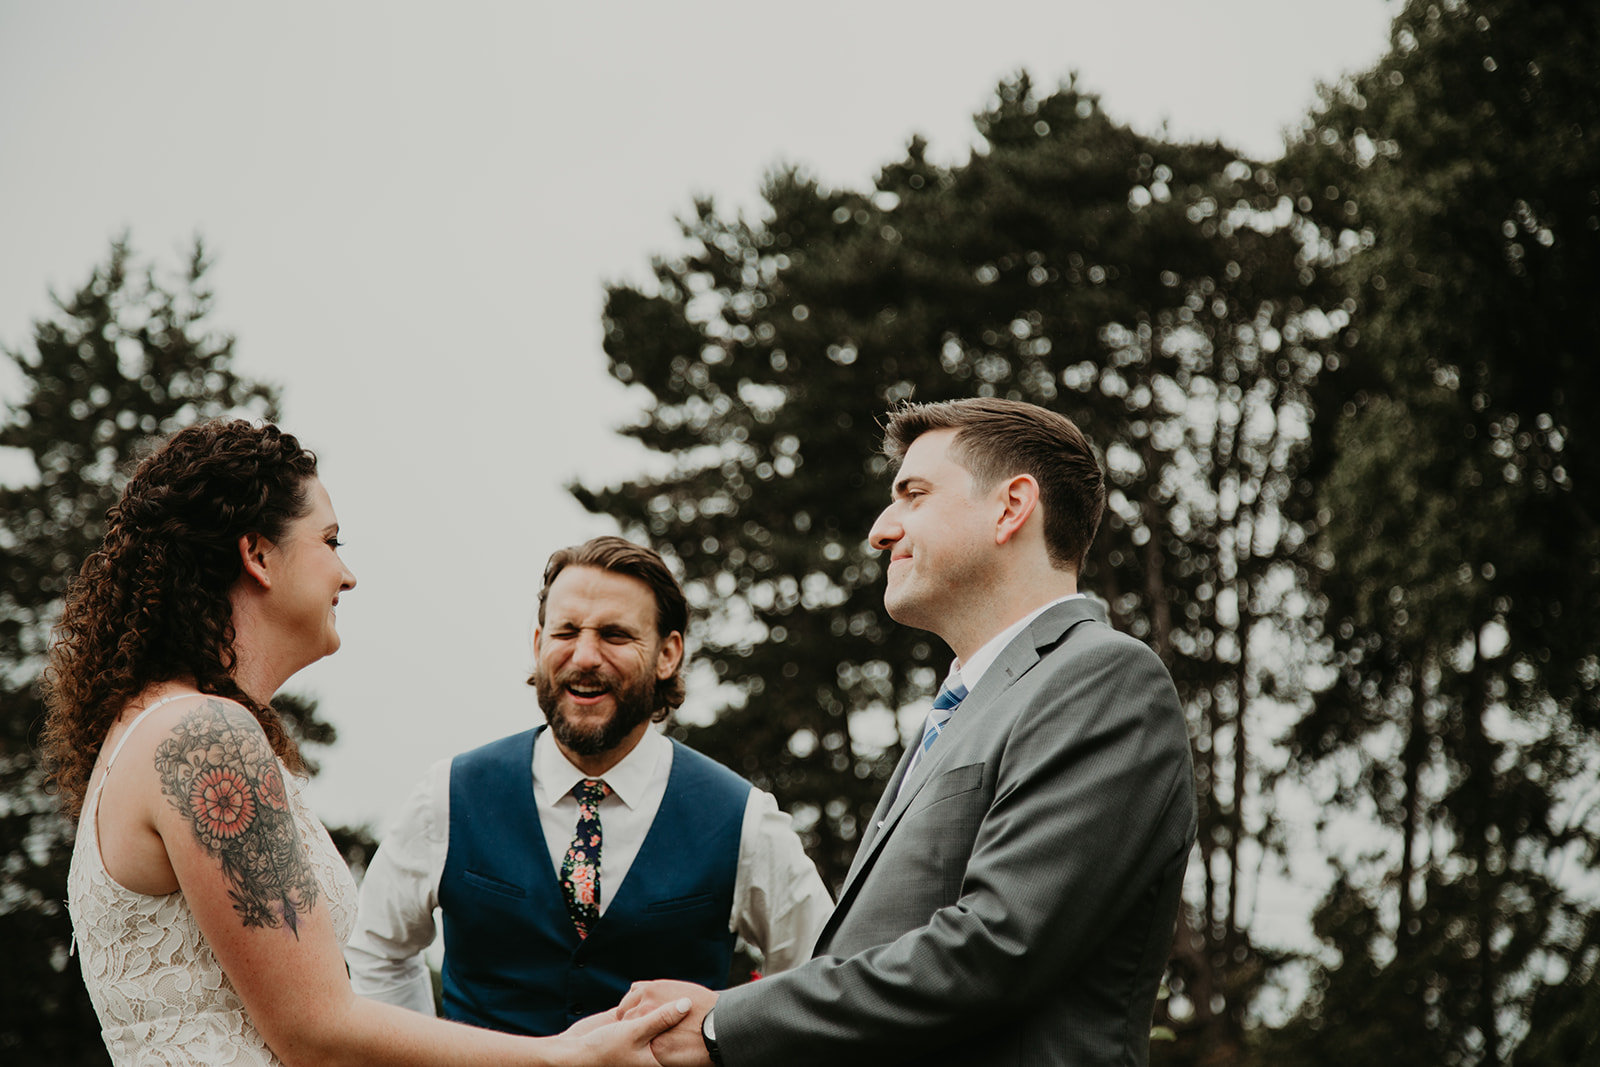 Vancouver wedding officiant Shawn Miller with Young Hip & Married